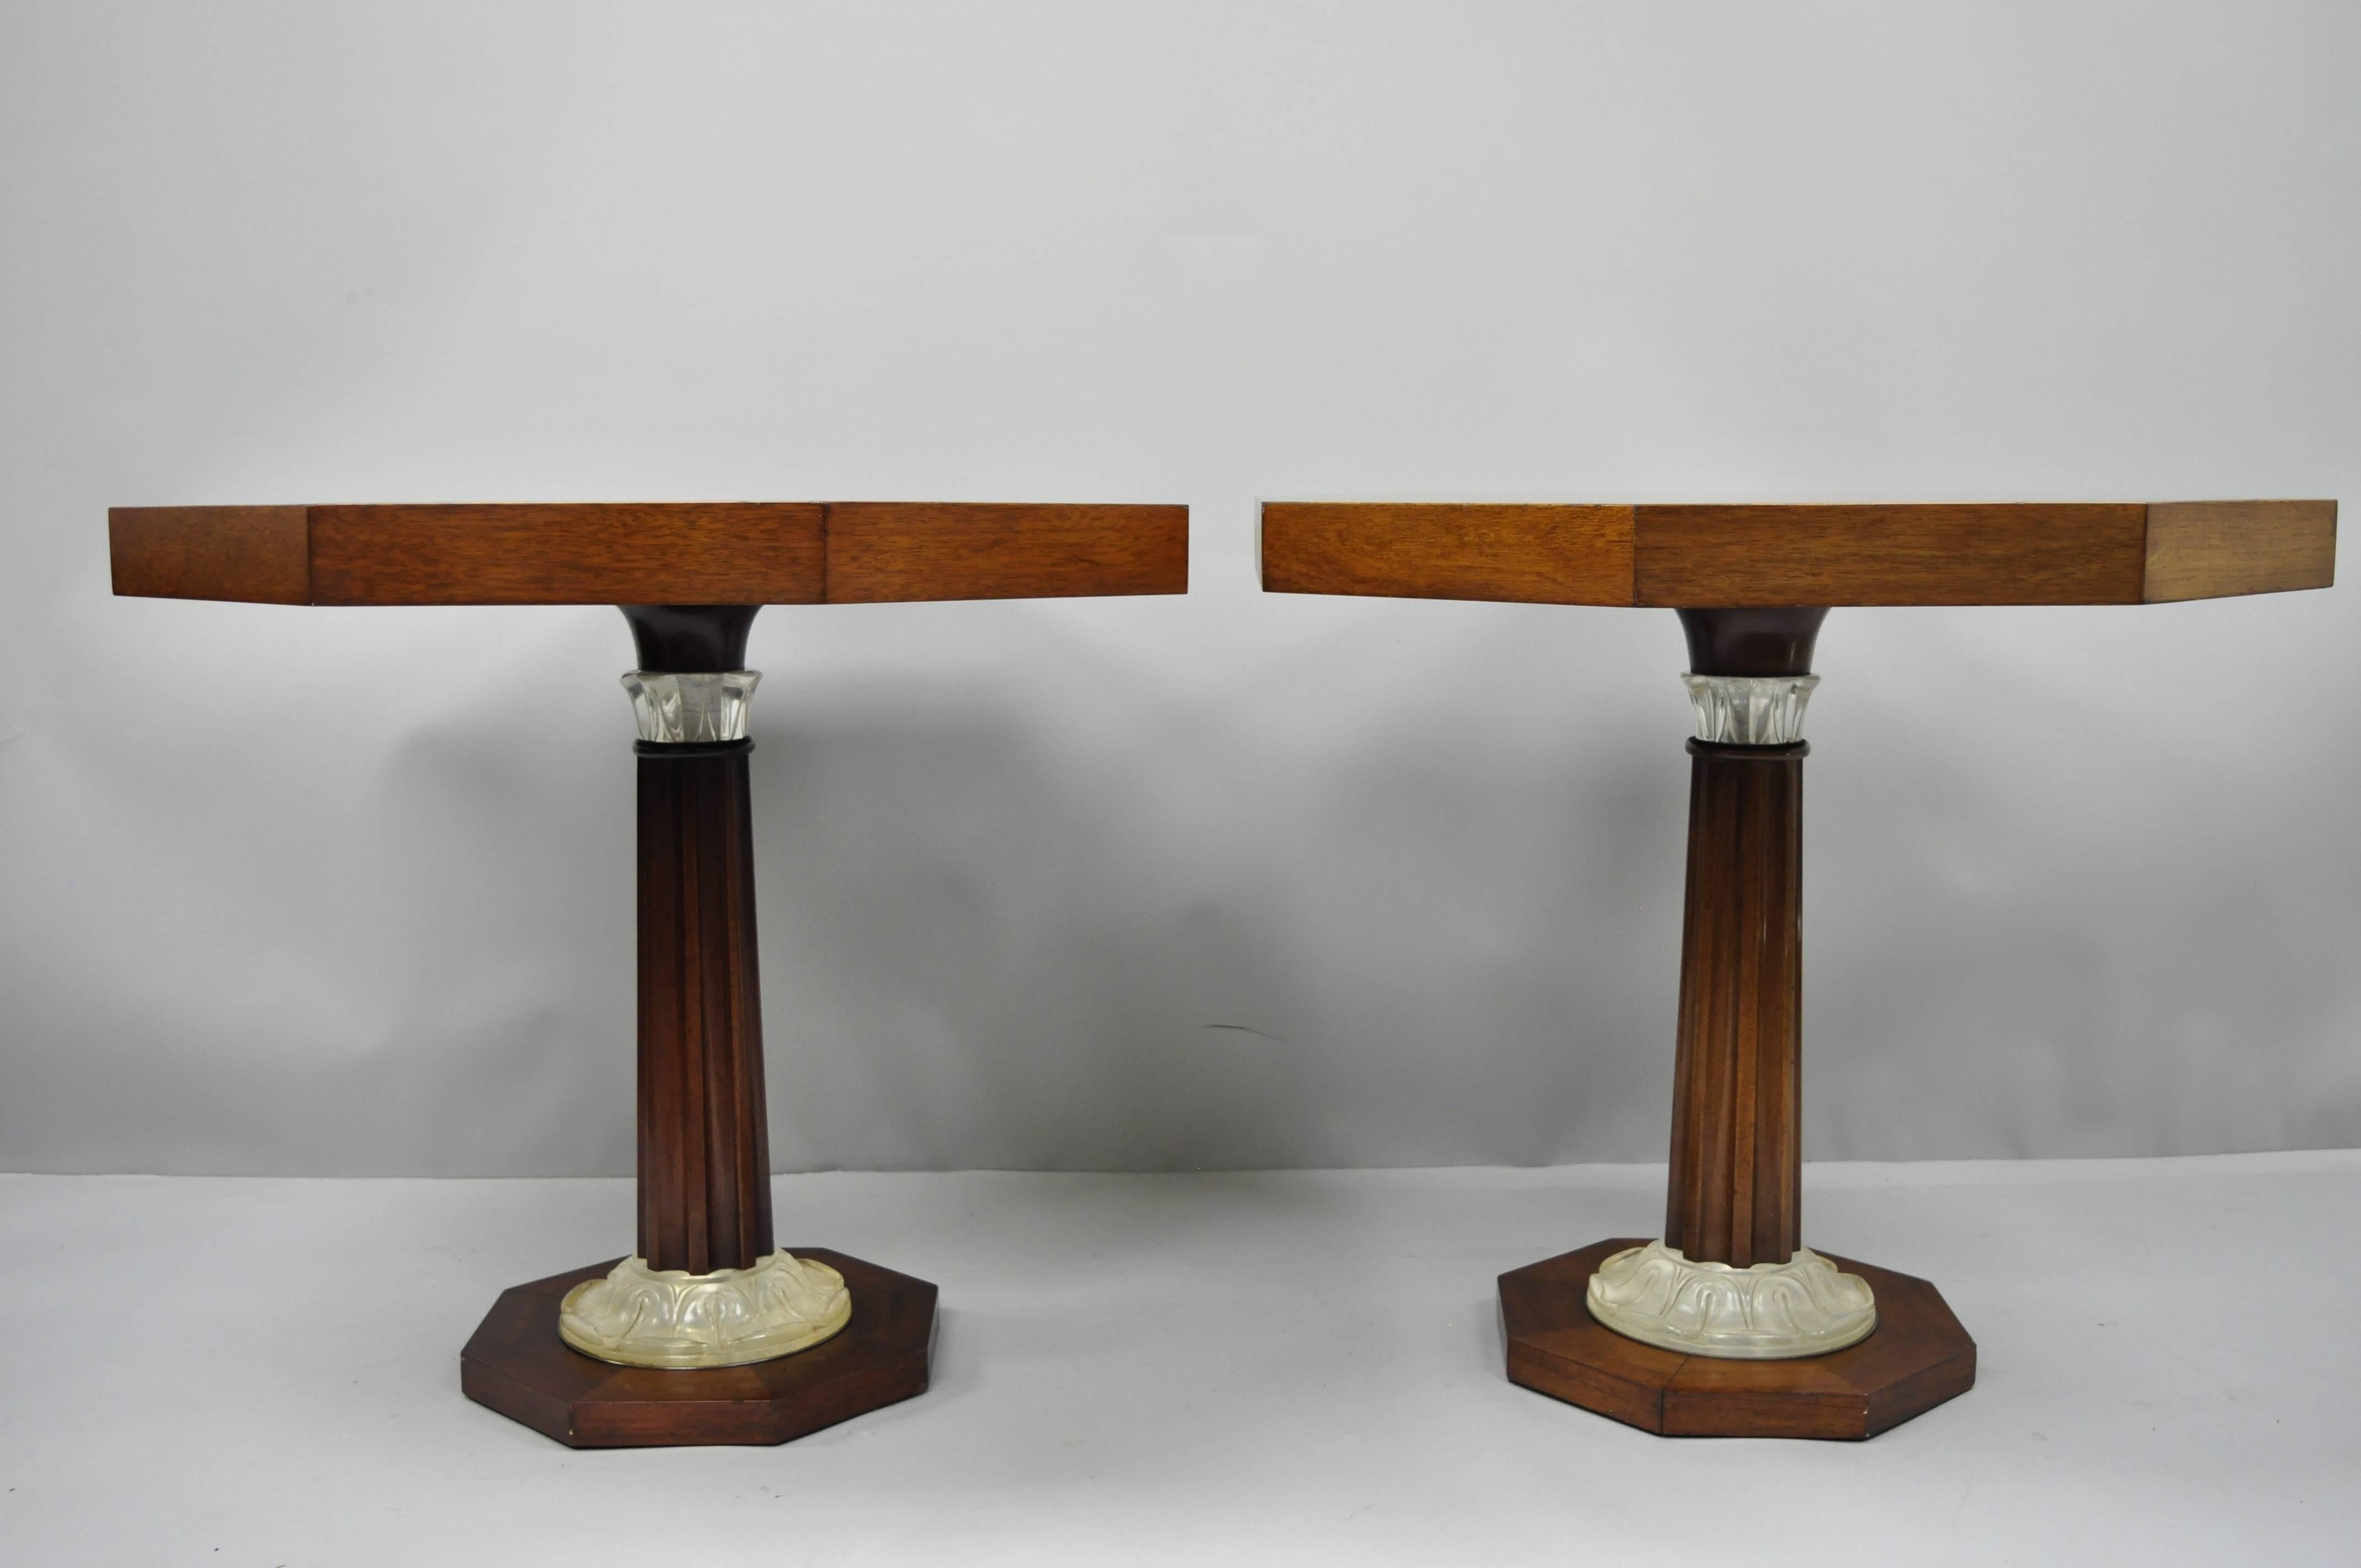 A pair of Art Deco French style octagonal mahogany pedestal base side tables with acrylic, Lucite accents attributed to Grosfeld House. Item features sunburst inlaid mahogany top, carved column pedestal base with acrylic leafy accents to the columns